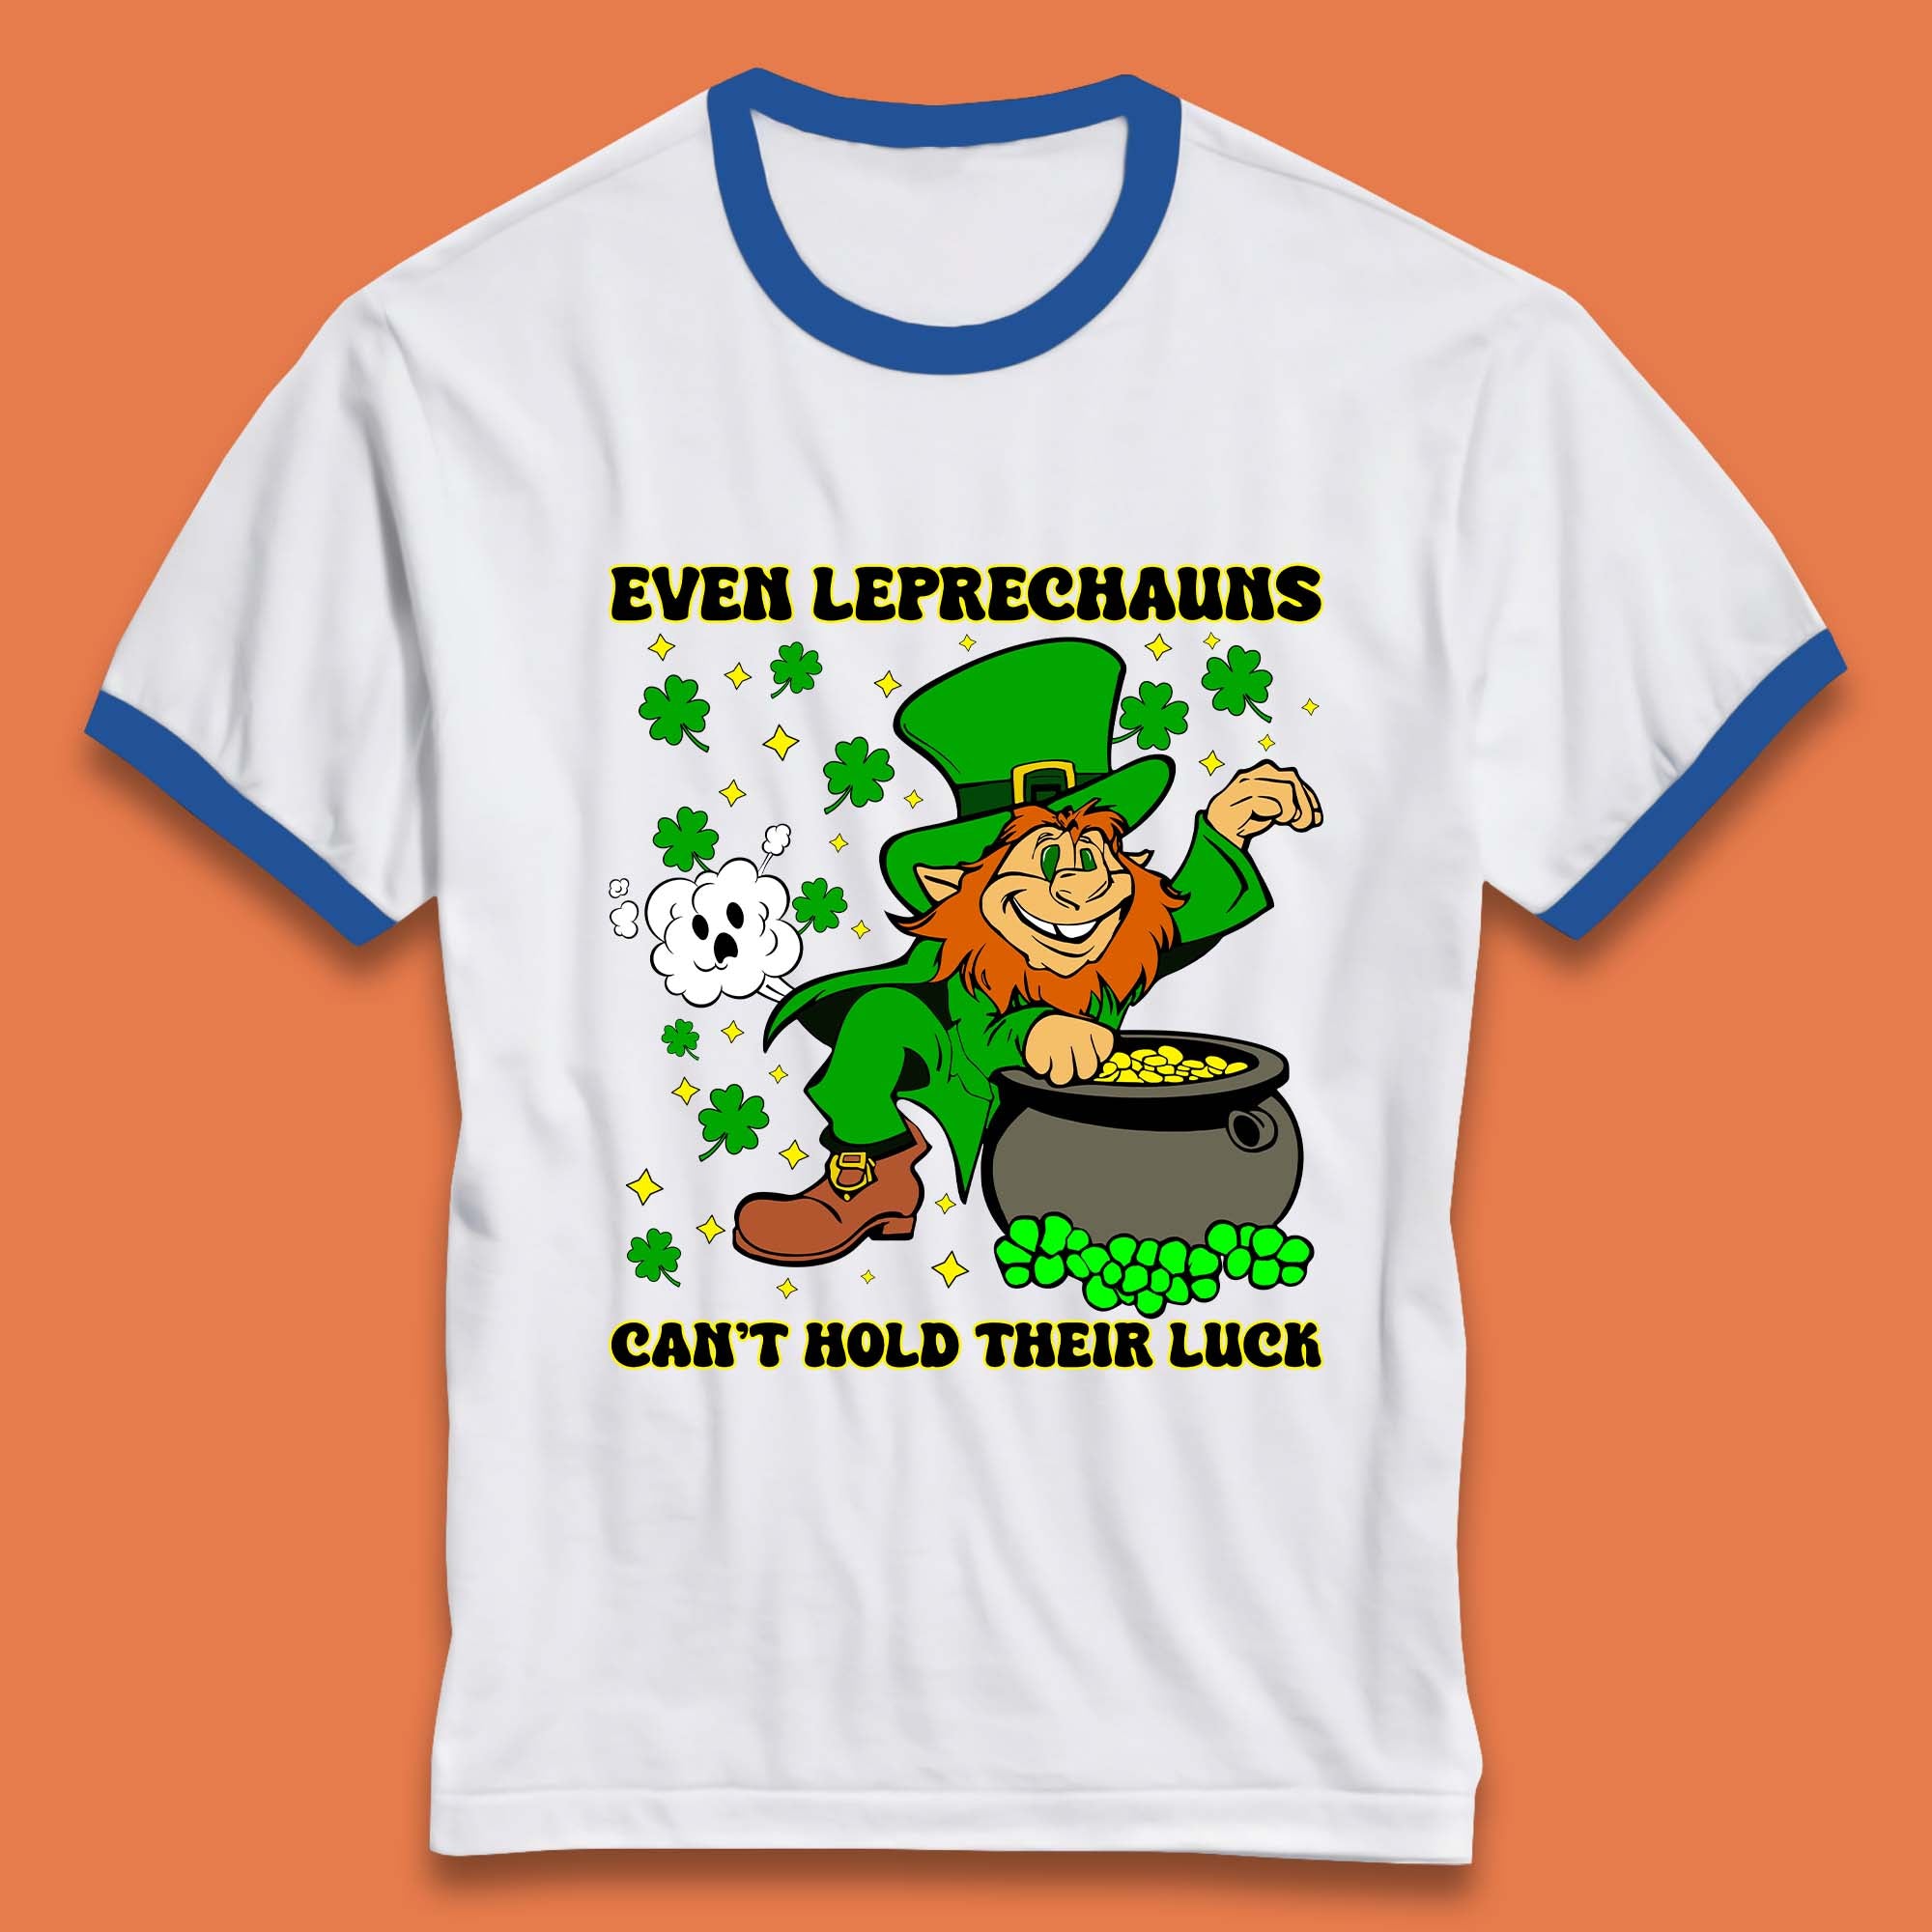 Leprechauns Can't Hold Their Luck Ringer T-Shirt